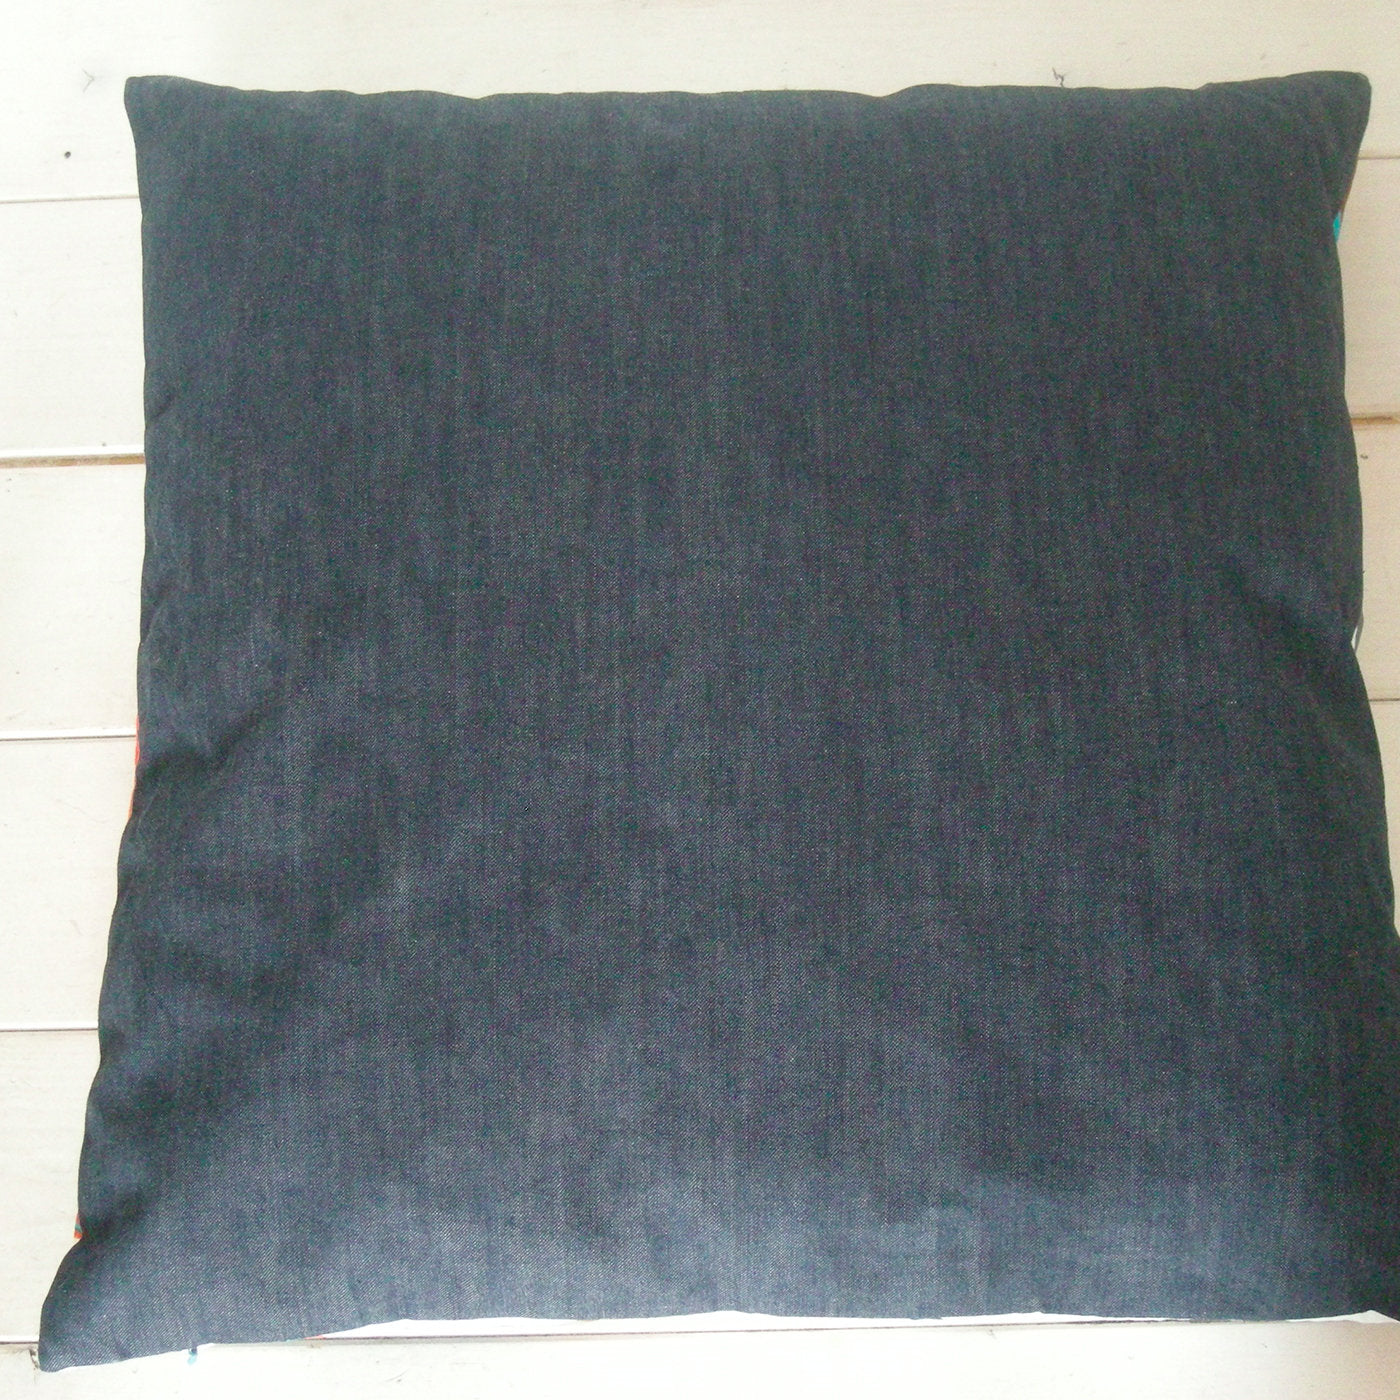 Double J - Jungla and Jeans Cushion - Alternative view 1